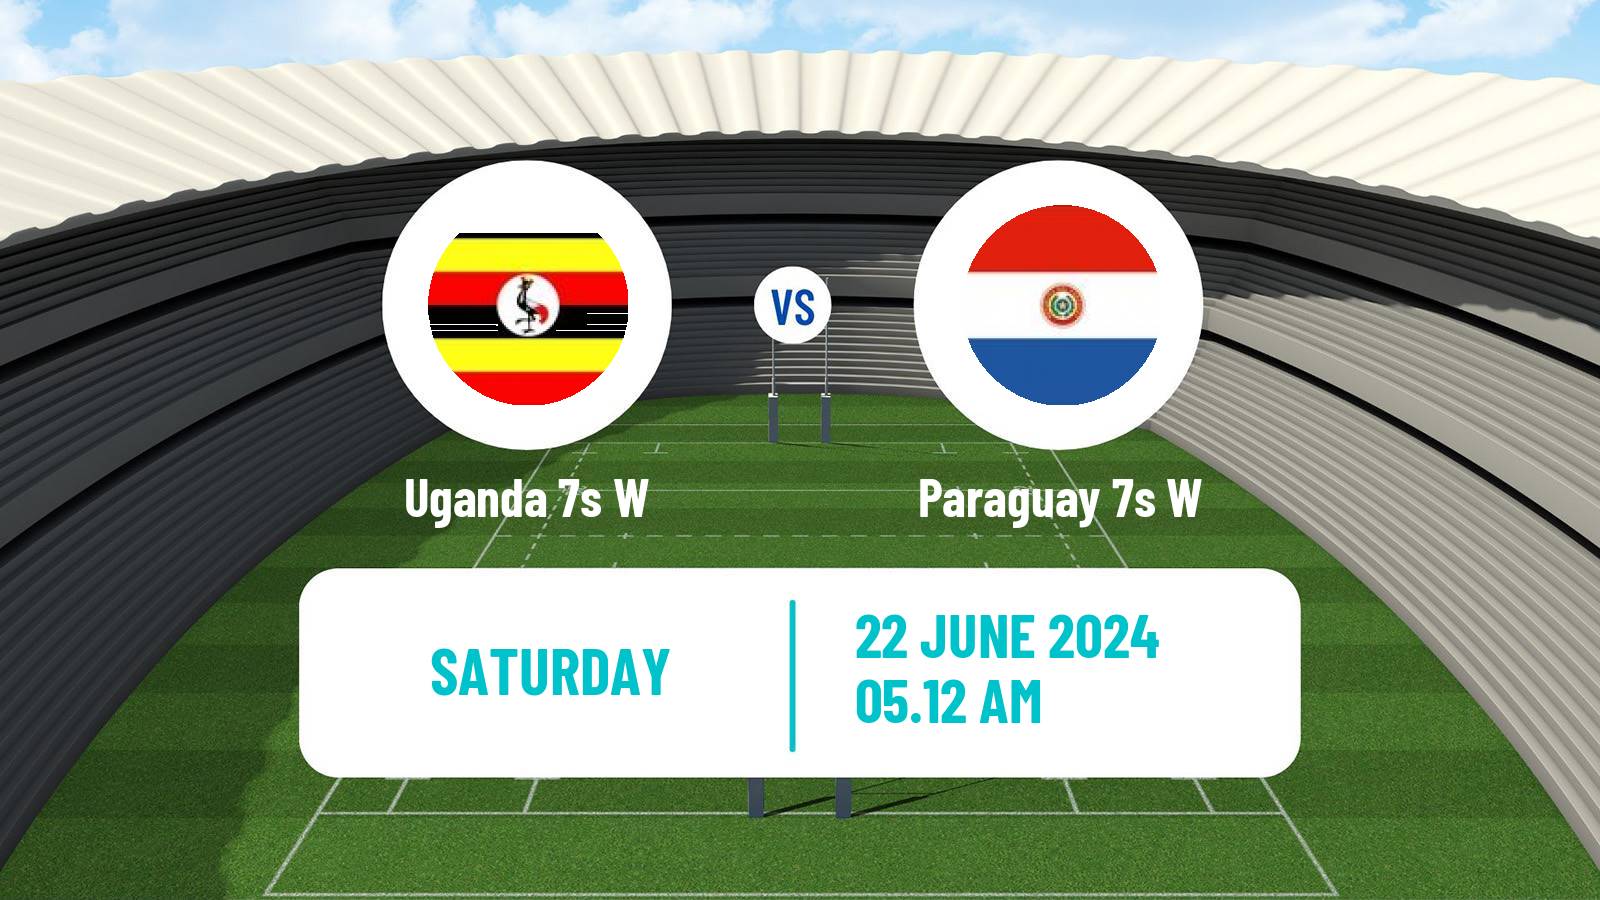 Rugby union Olympic Games 7s Rugby Women Uganda 7s W - Paraguay 7s W